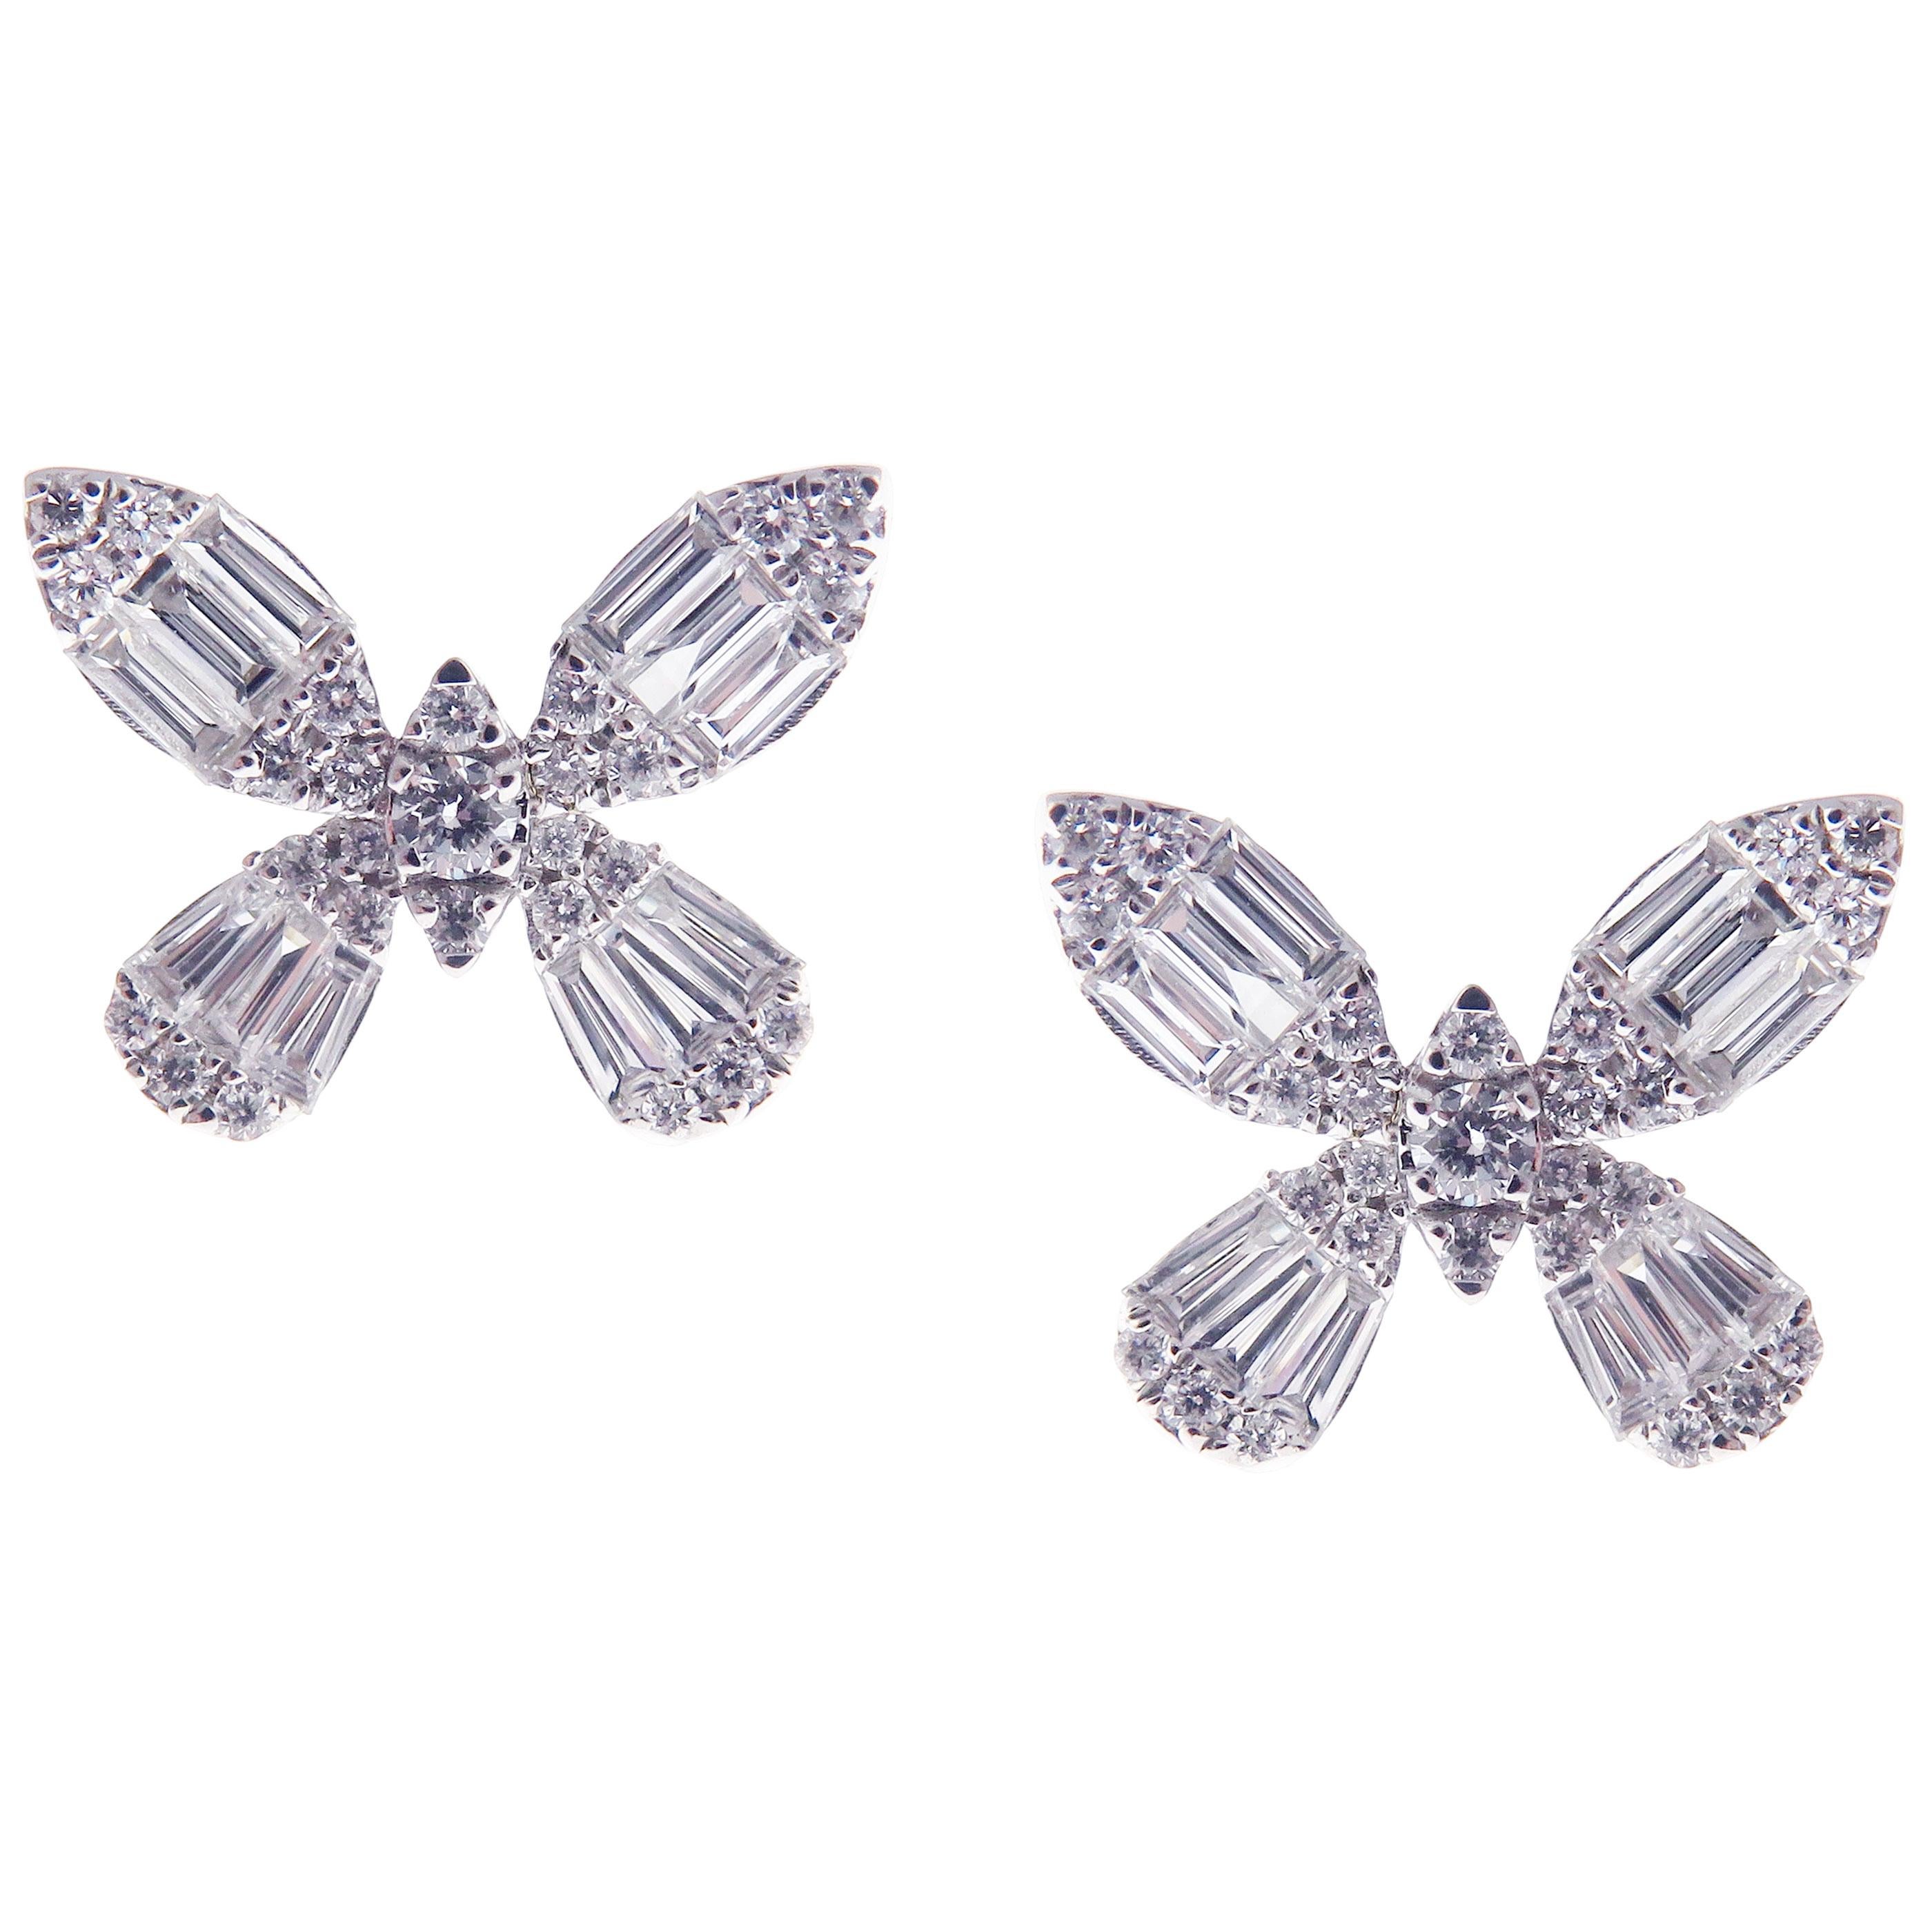 This round and baguette combination diamond butterfly stud earring is crafted in 18-karat white gold, featuring 54 round white diamonds totaling of 0.32 carats and 24 baguette white diamonds totaling of 0.63 carats.
Approximate total weight 3.75